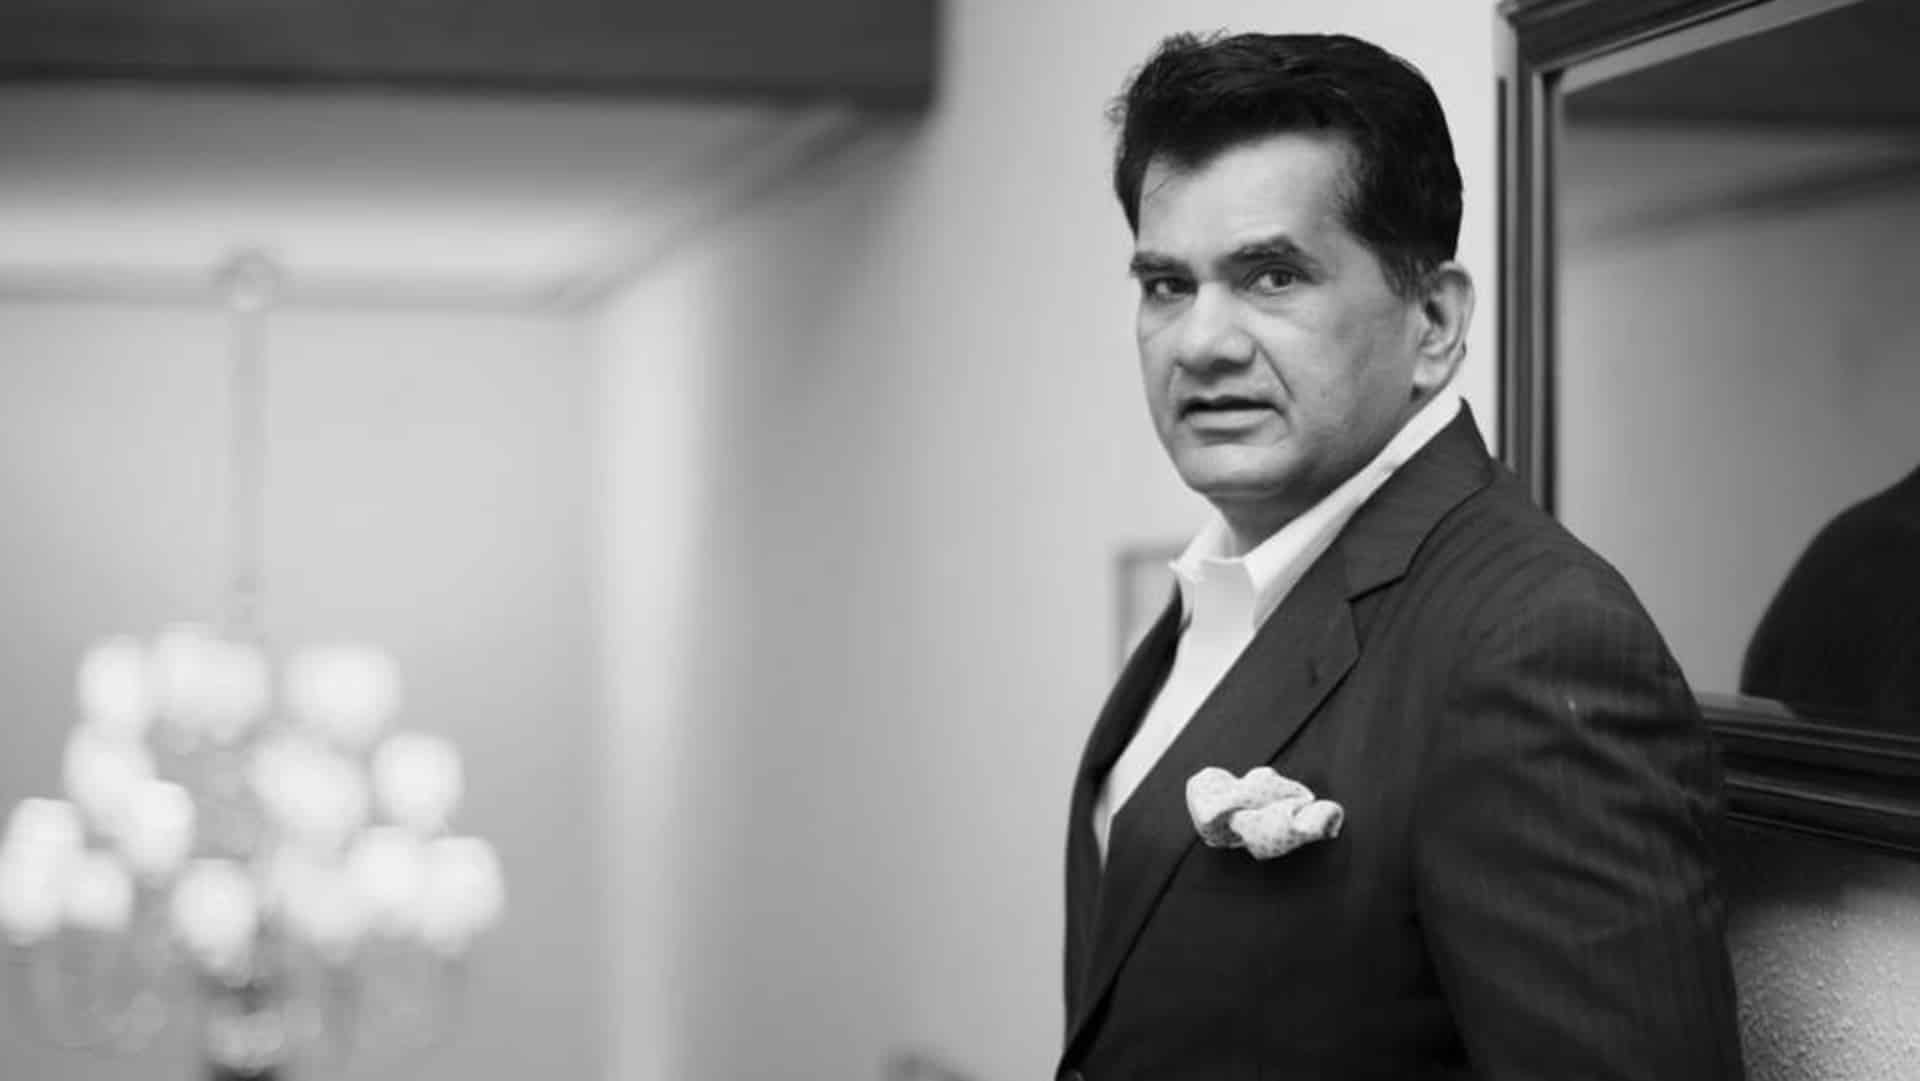 Govt will push for more reforms across sectors: Niti Aayog CEO Amitabh Kant